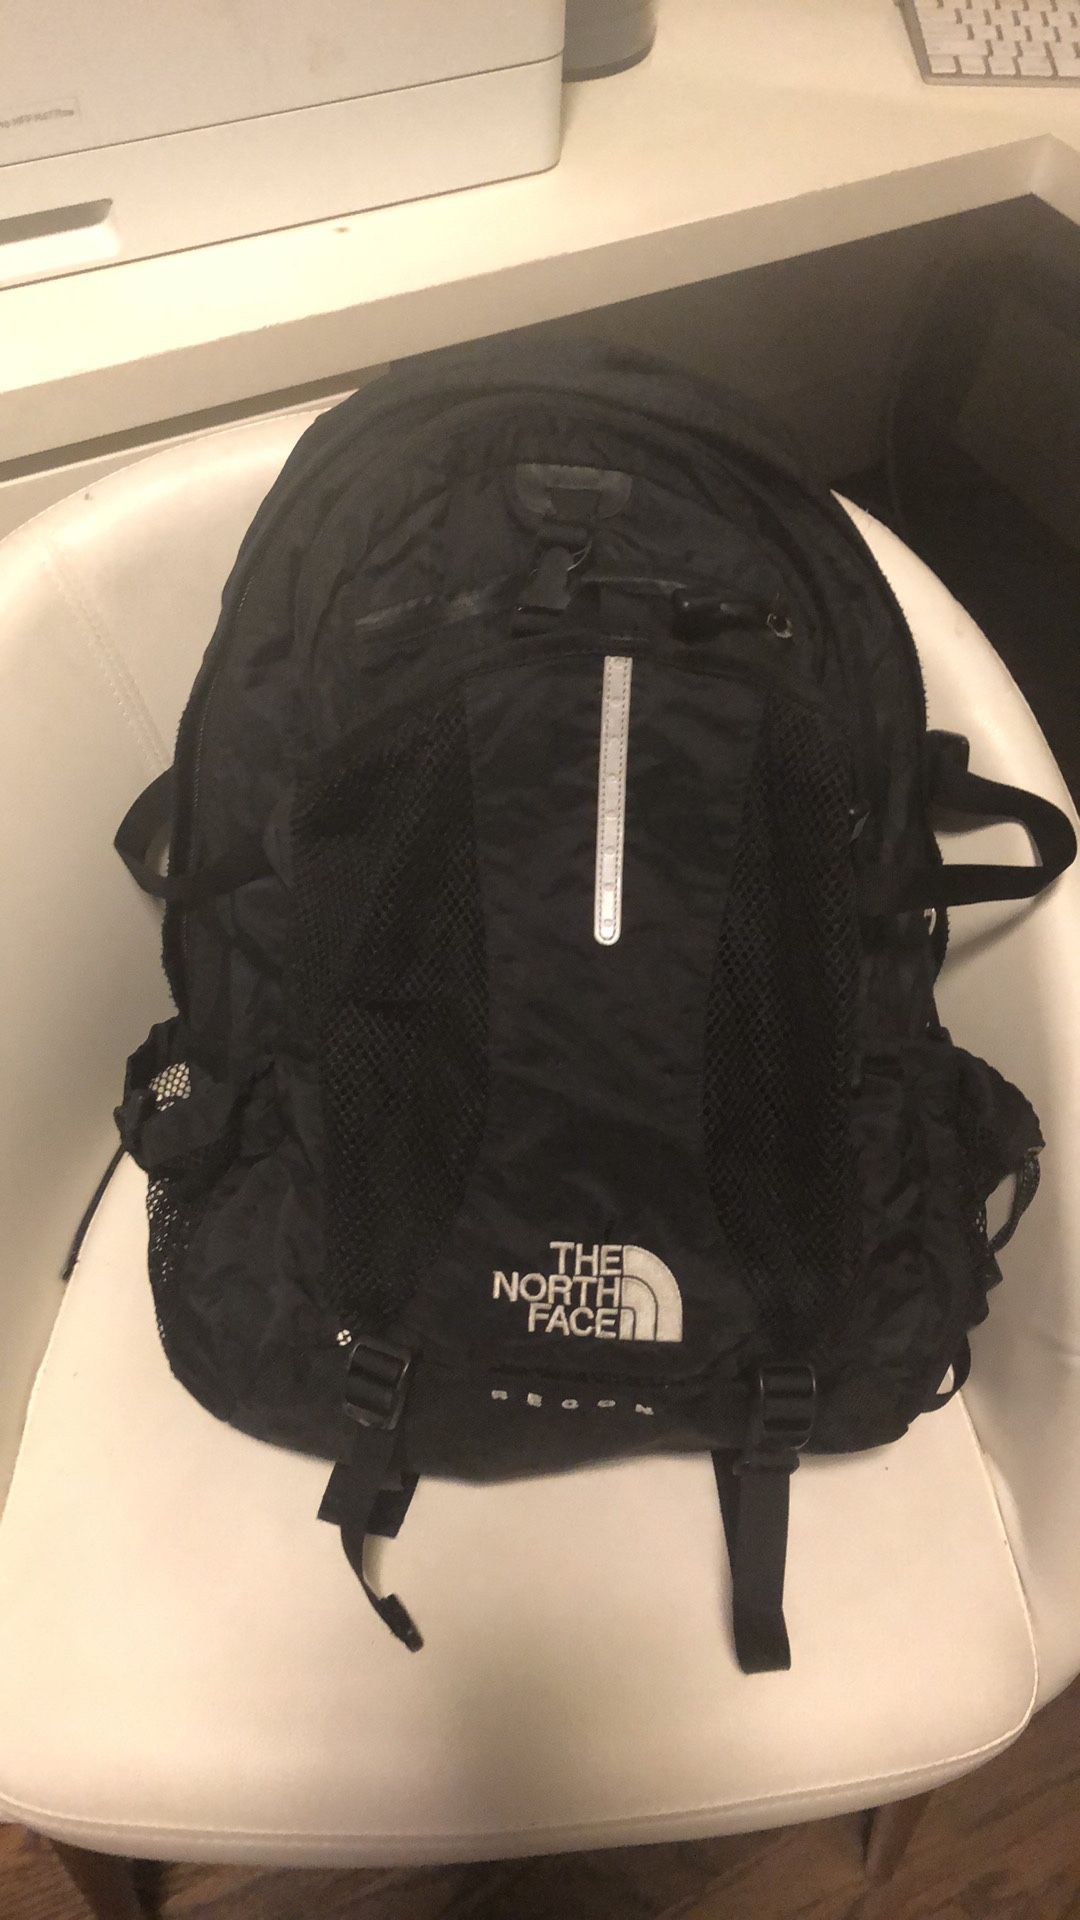 The North face backpack